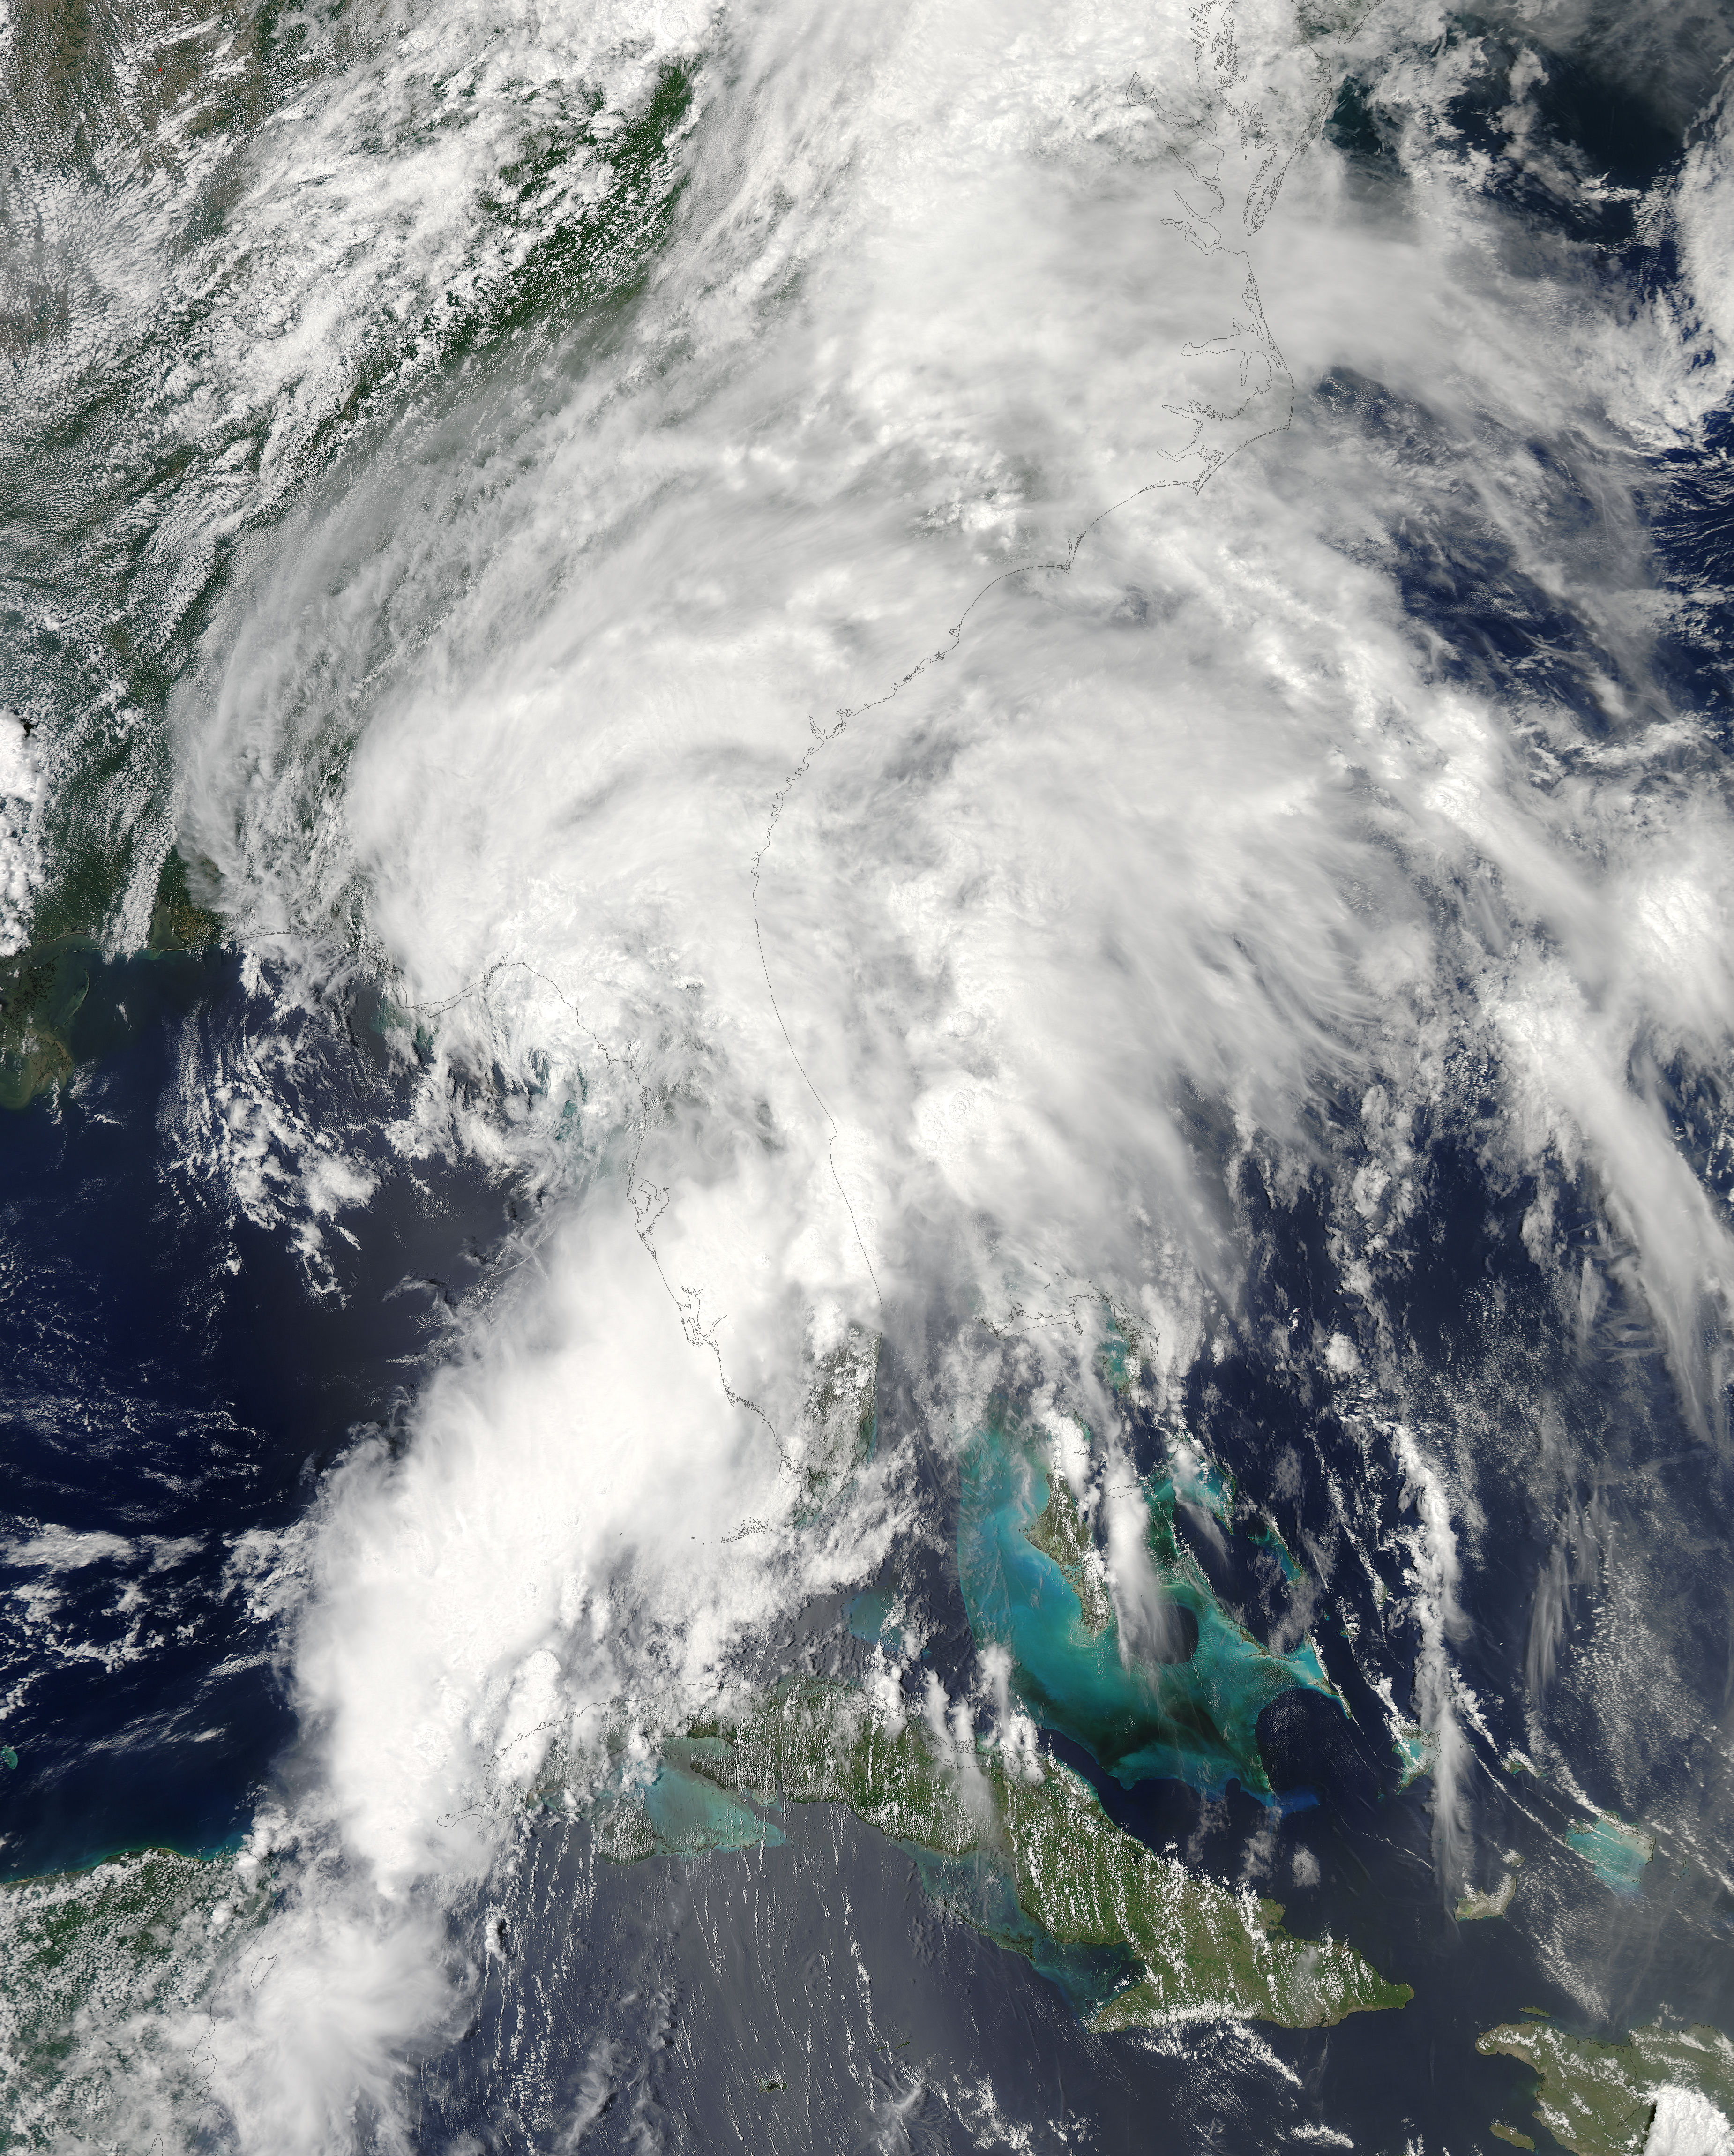 Tropical Storm Andrea (01L) over Florida - related image preview